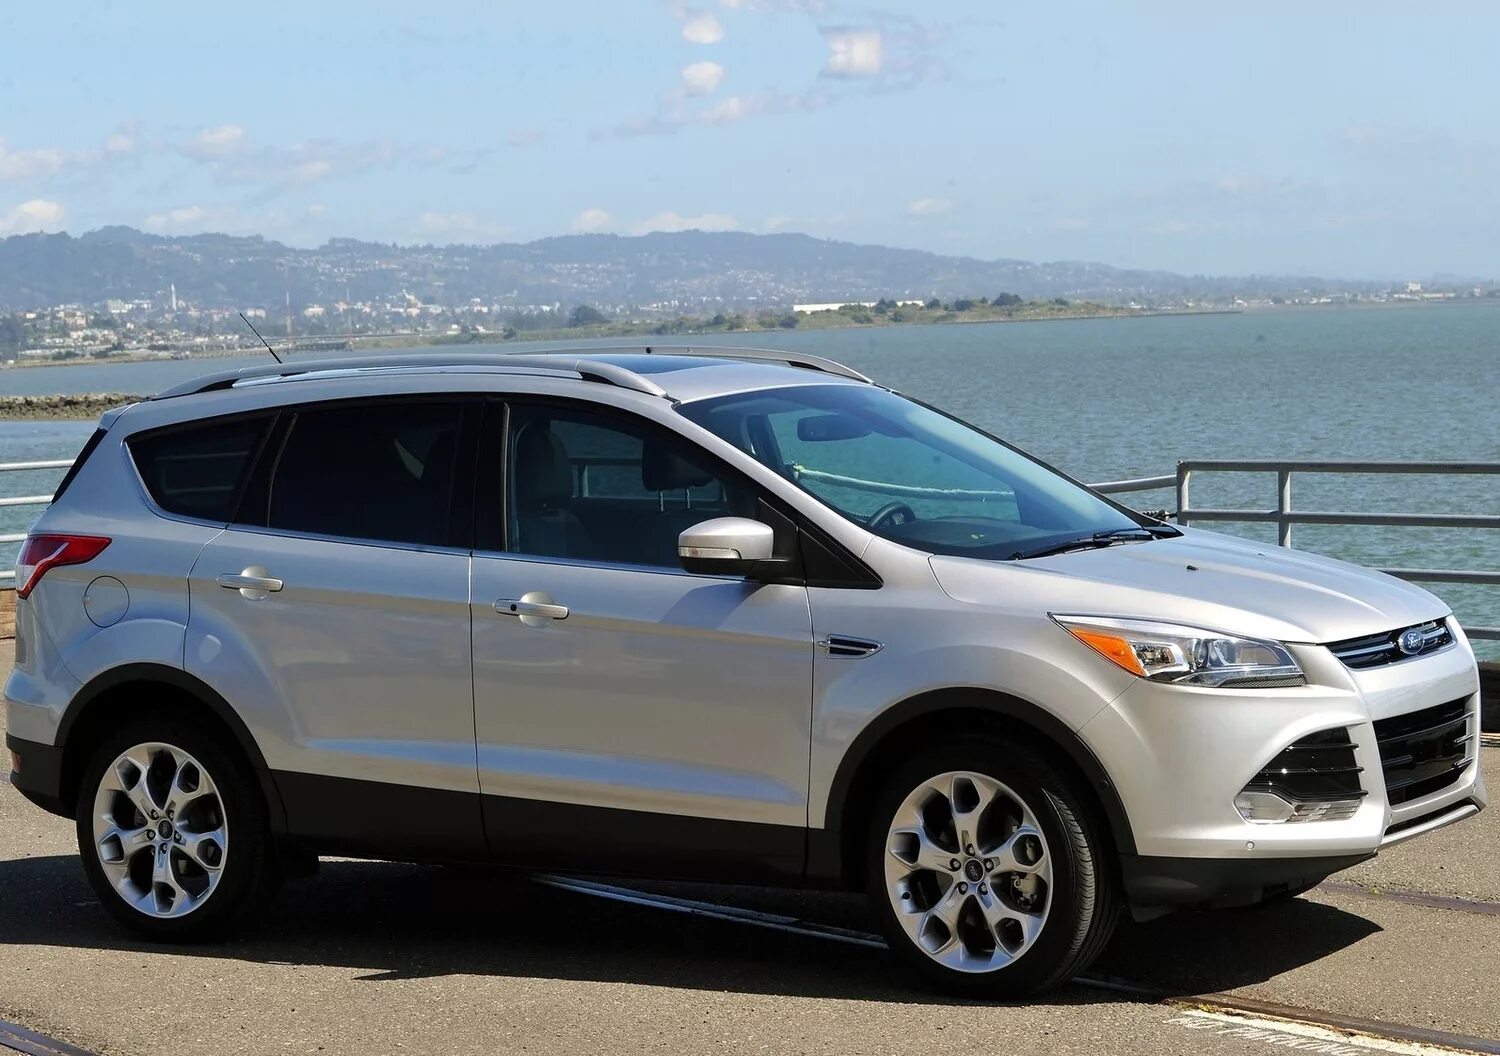 Ford Escape 2013. Форд Эскейп 2013. Форд Эскейп 3. Форд Эскейп 2015. Кроссоверы 24 года